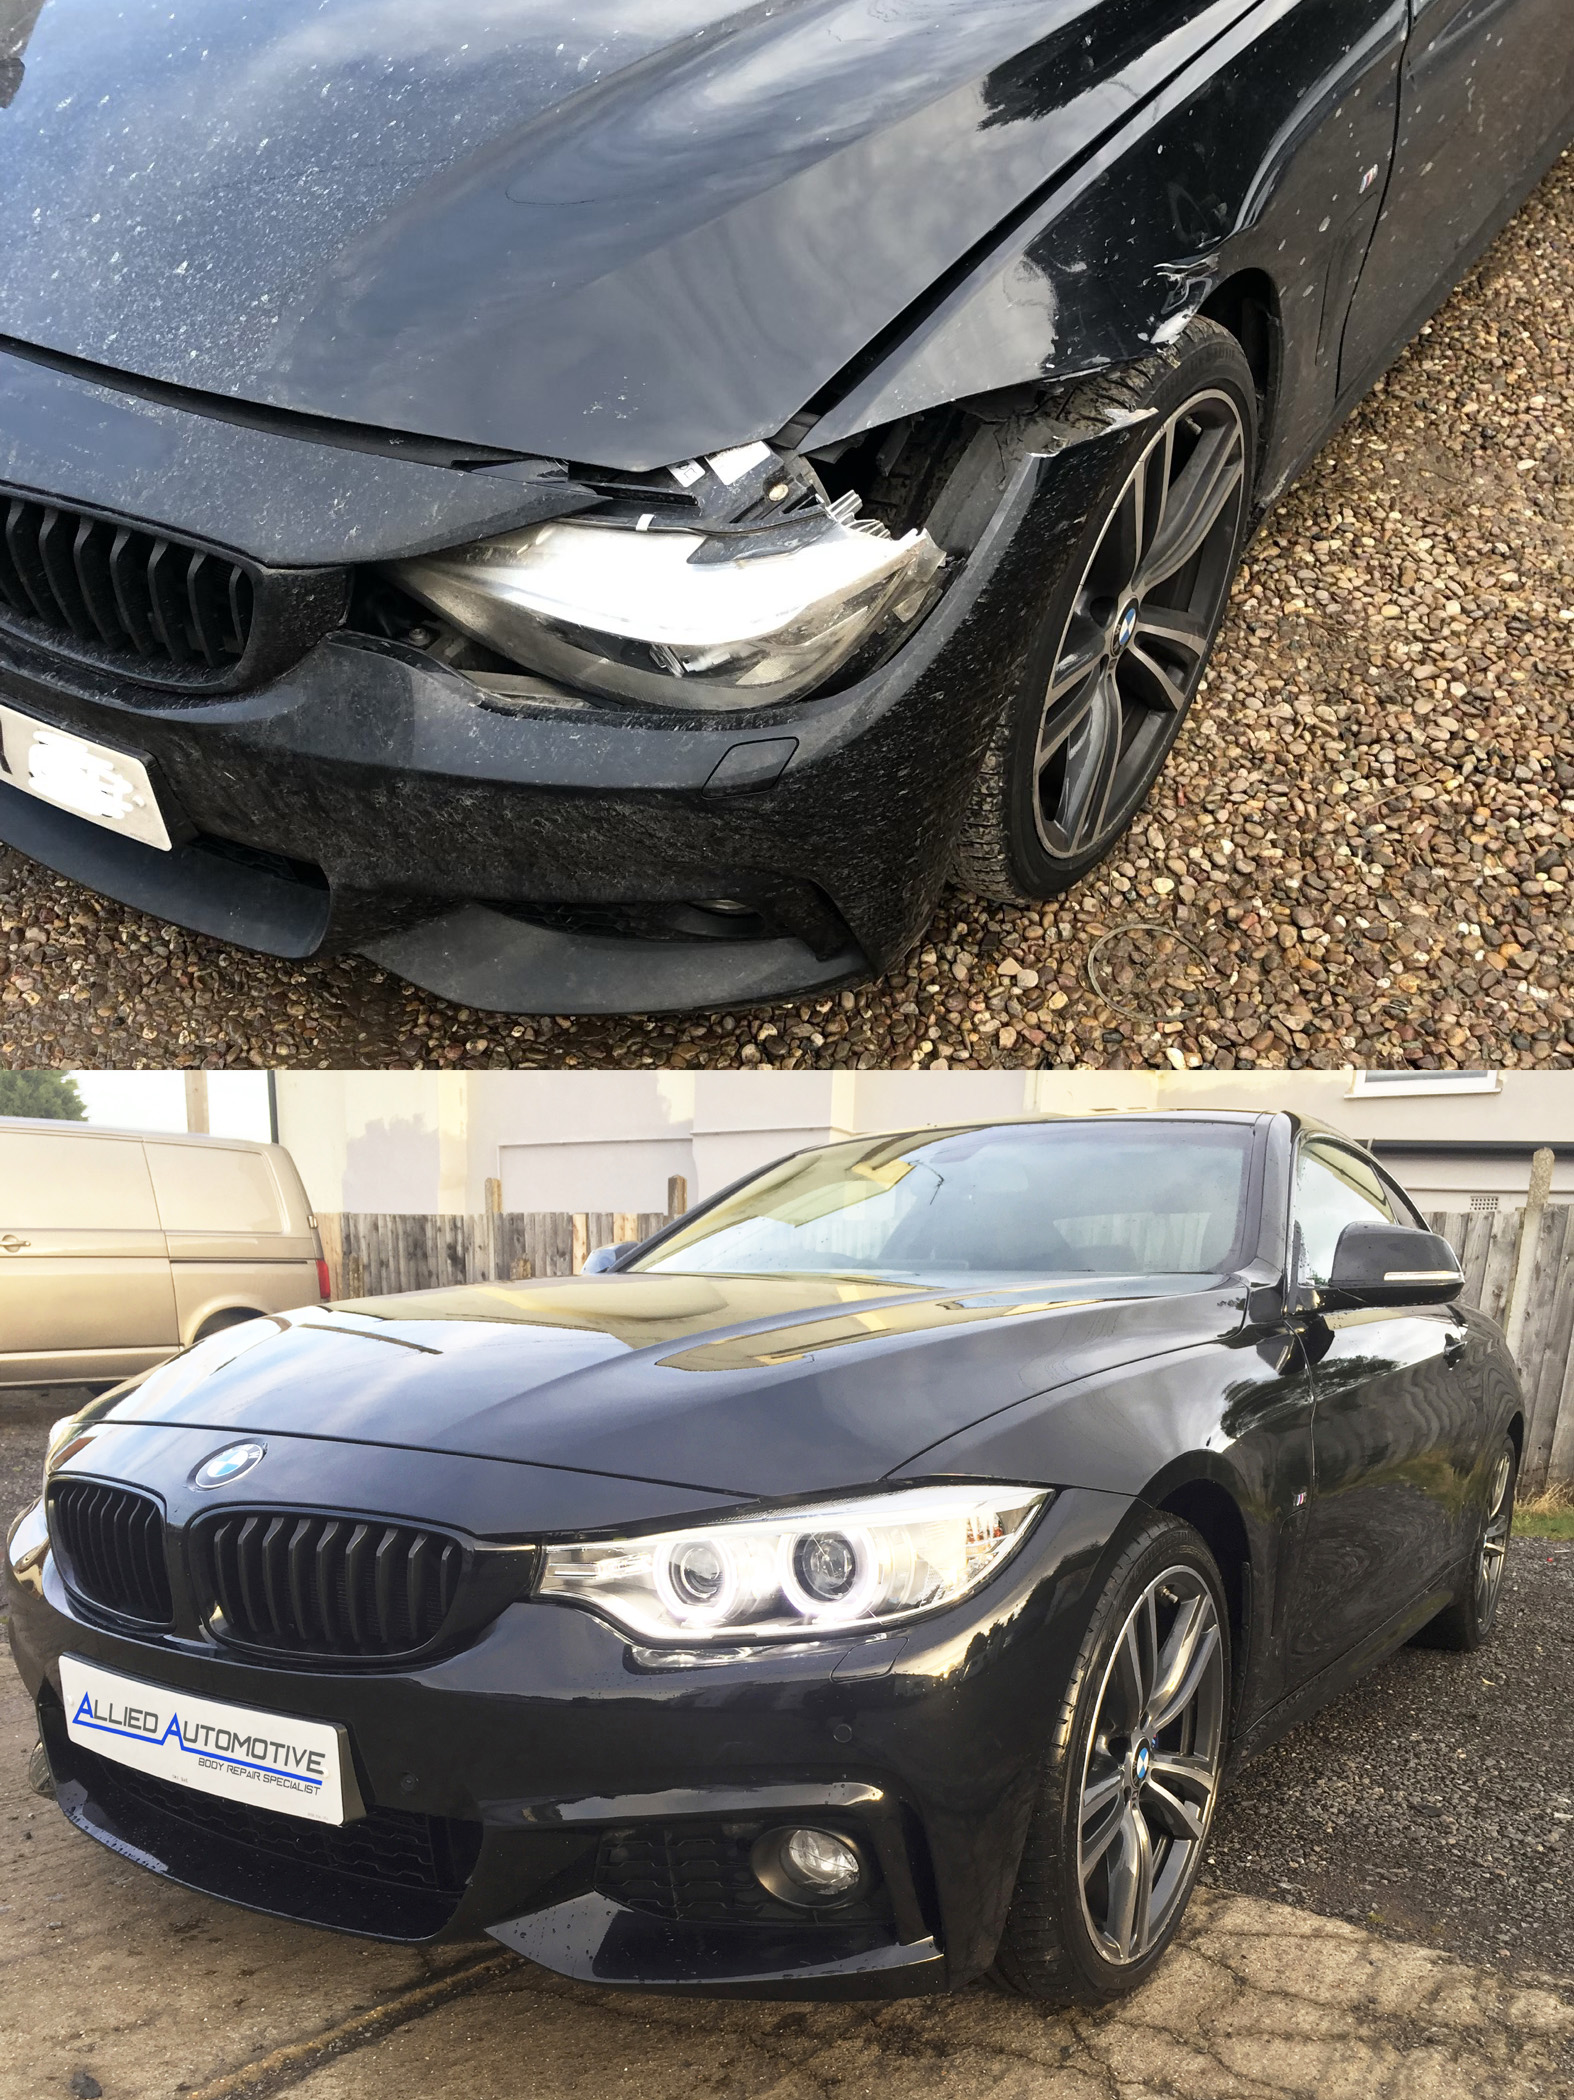 Body repair on a BMW, beefore and after